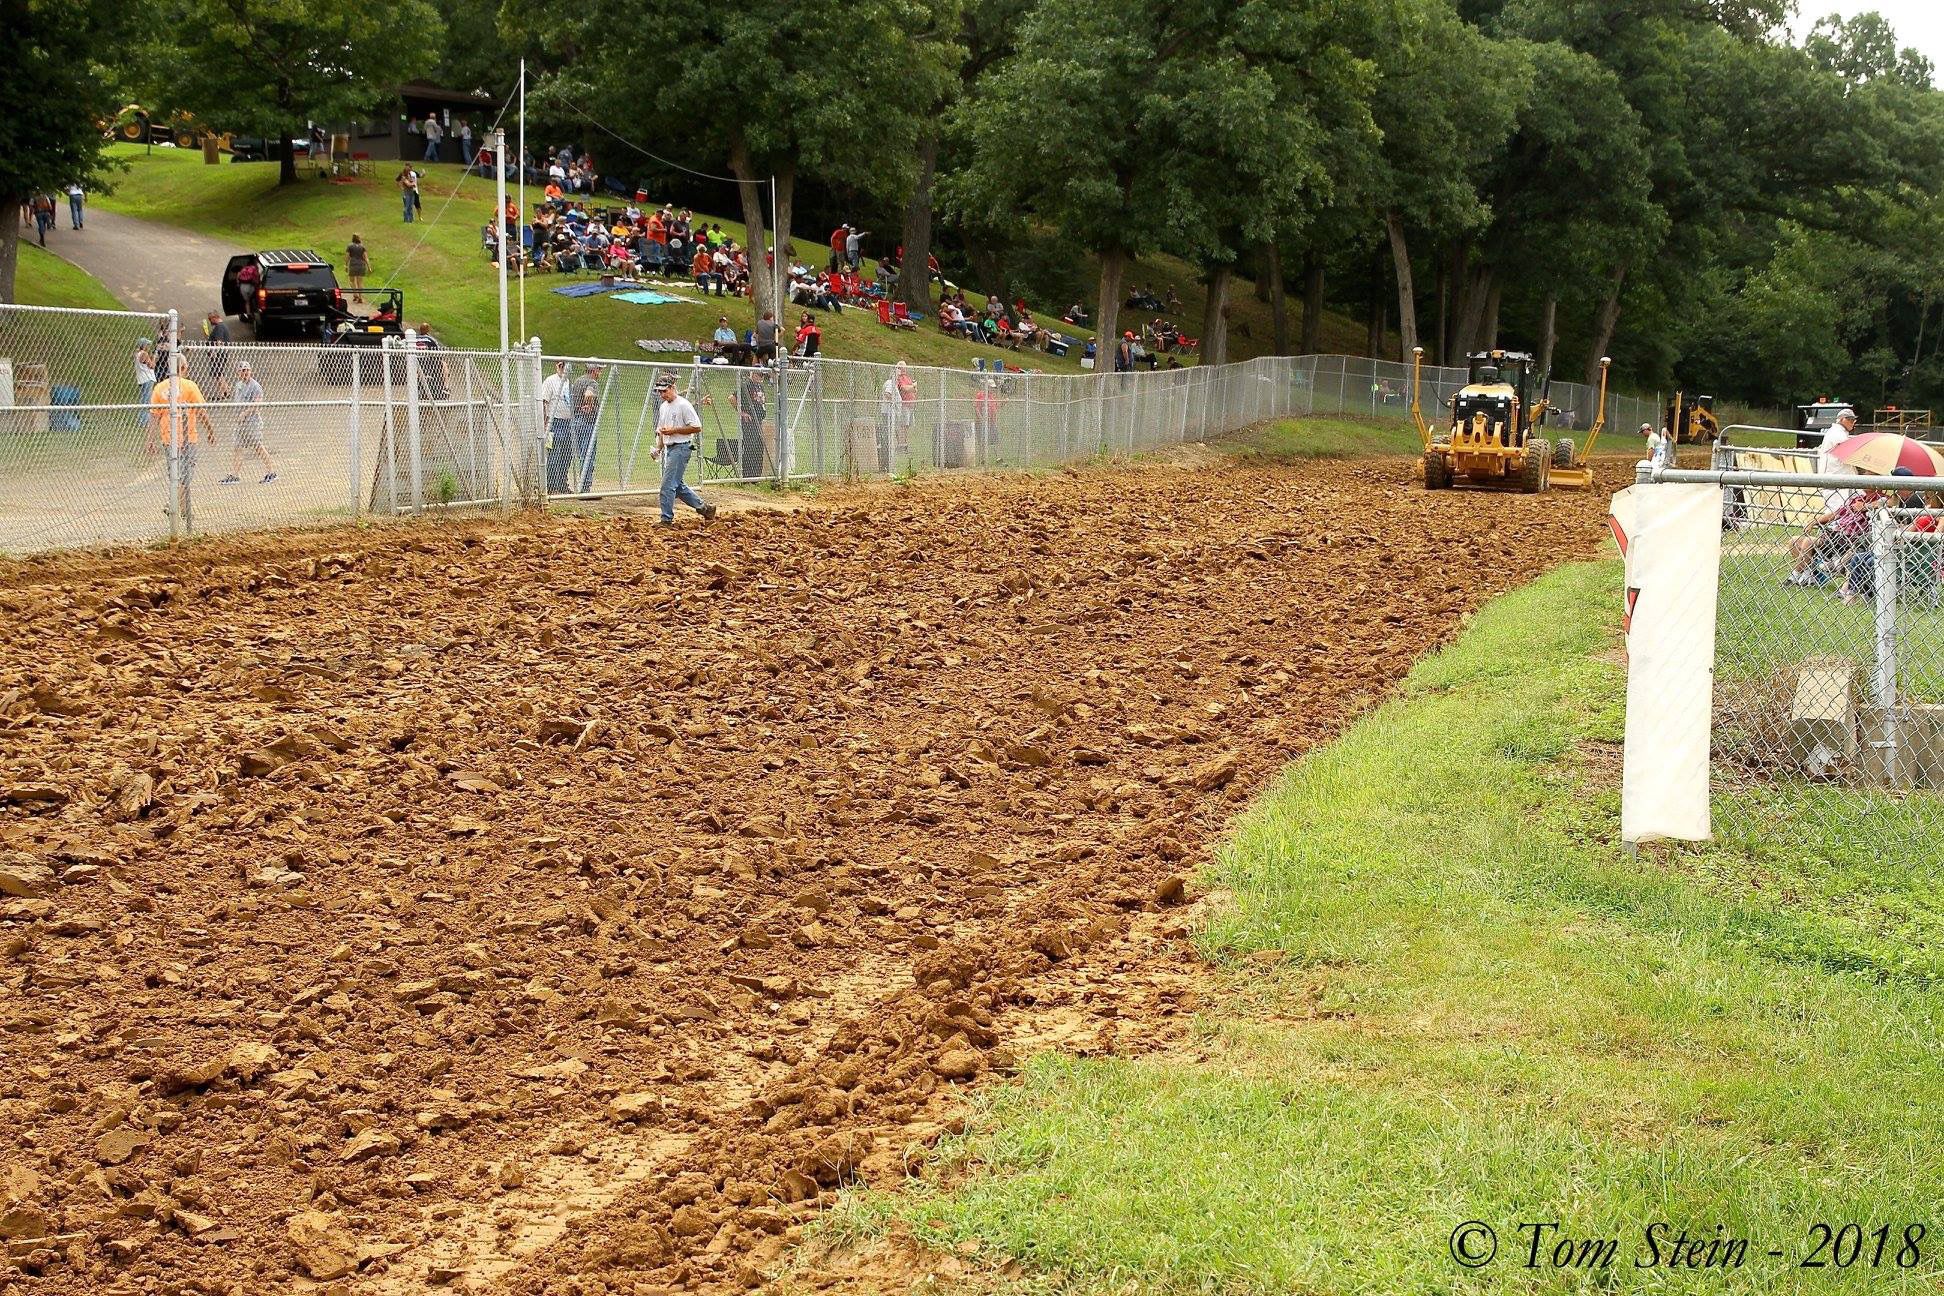 With fans already in place and practice nearing, the track surface starts to take shape.